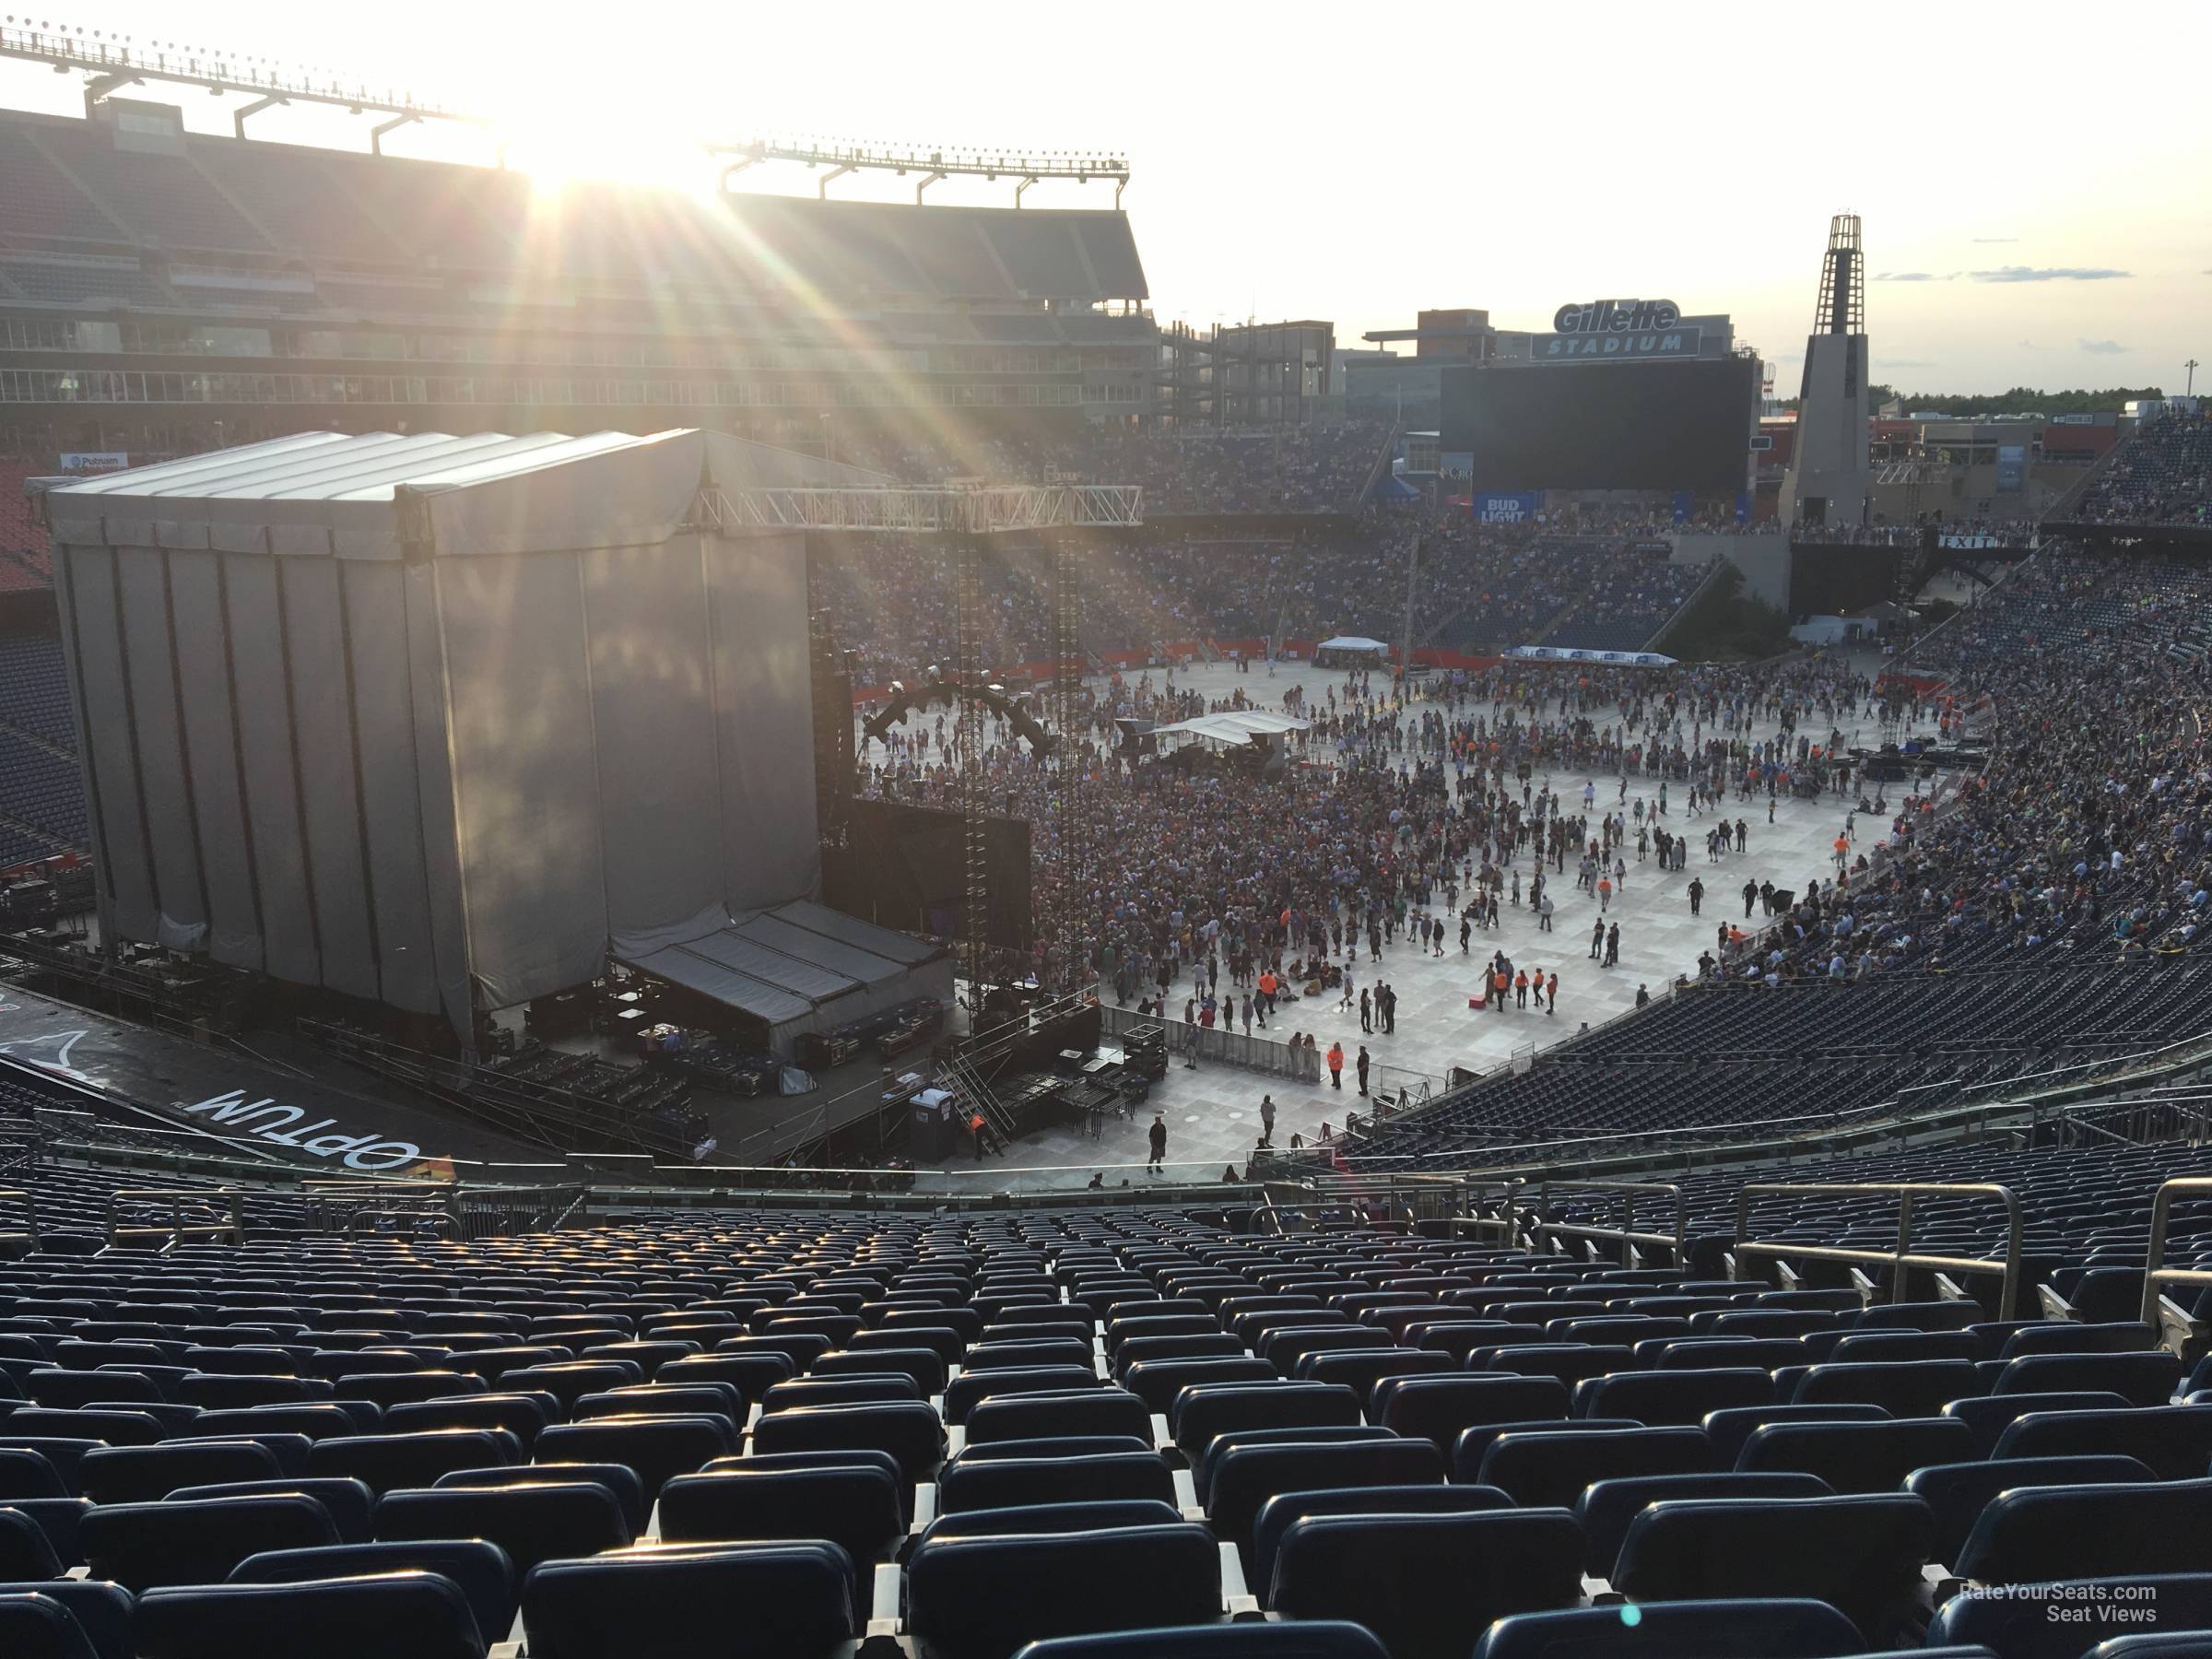 section 217, row 27 seat view  for concert - gillette stadium